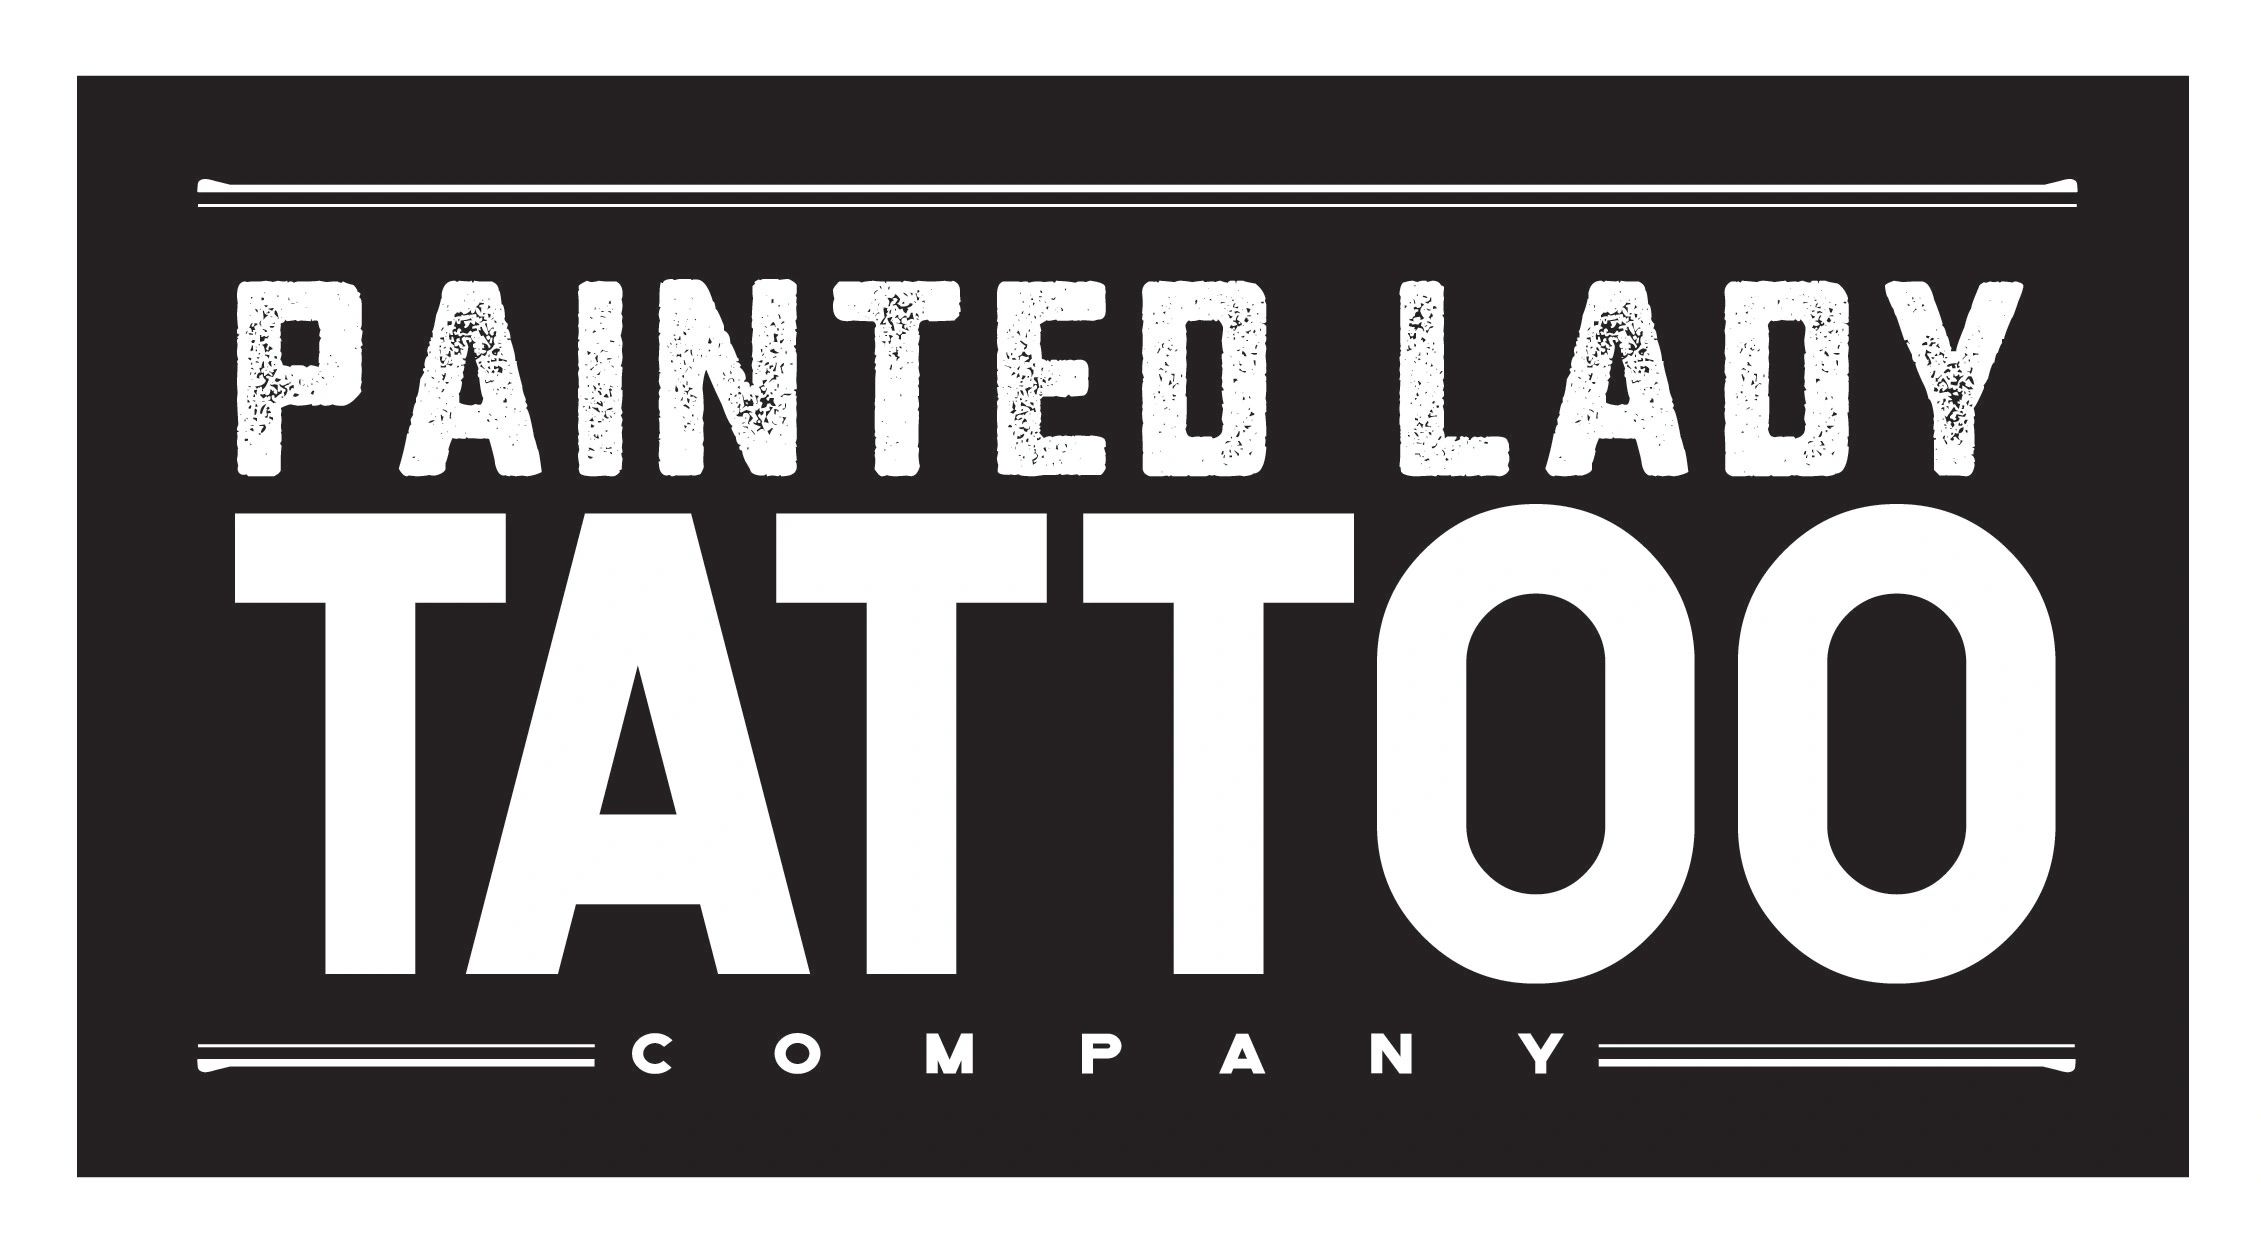 9. The Painted Lady Tattoo - wide 3